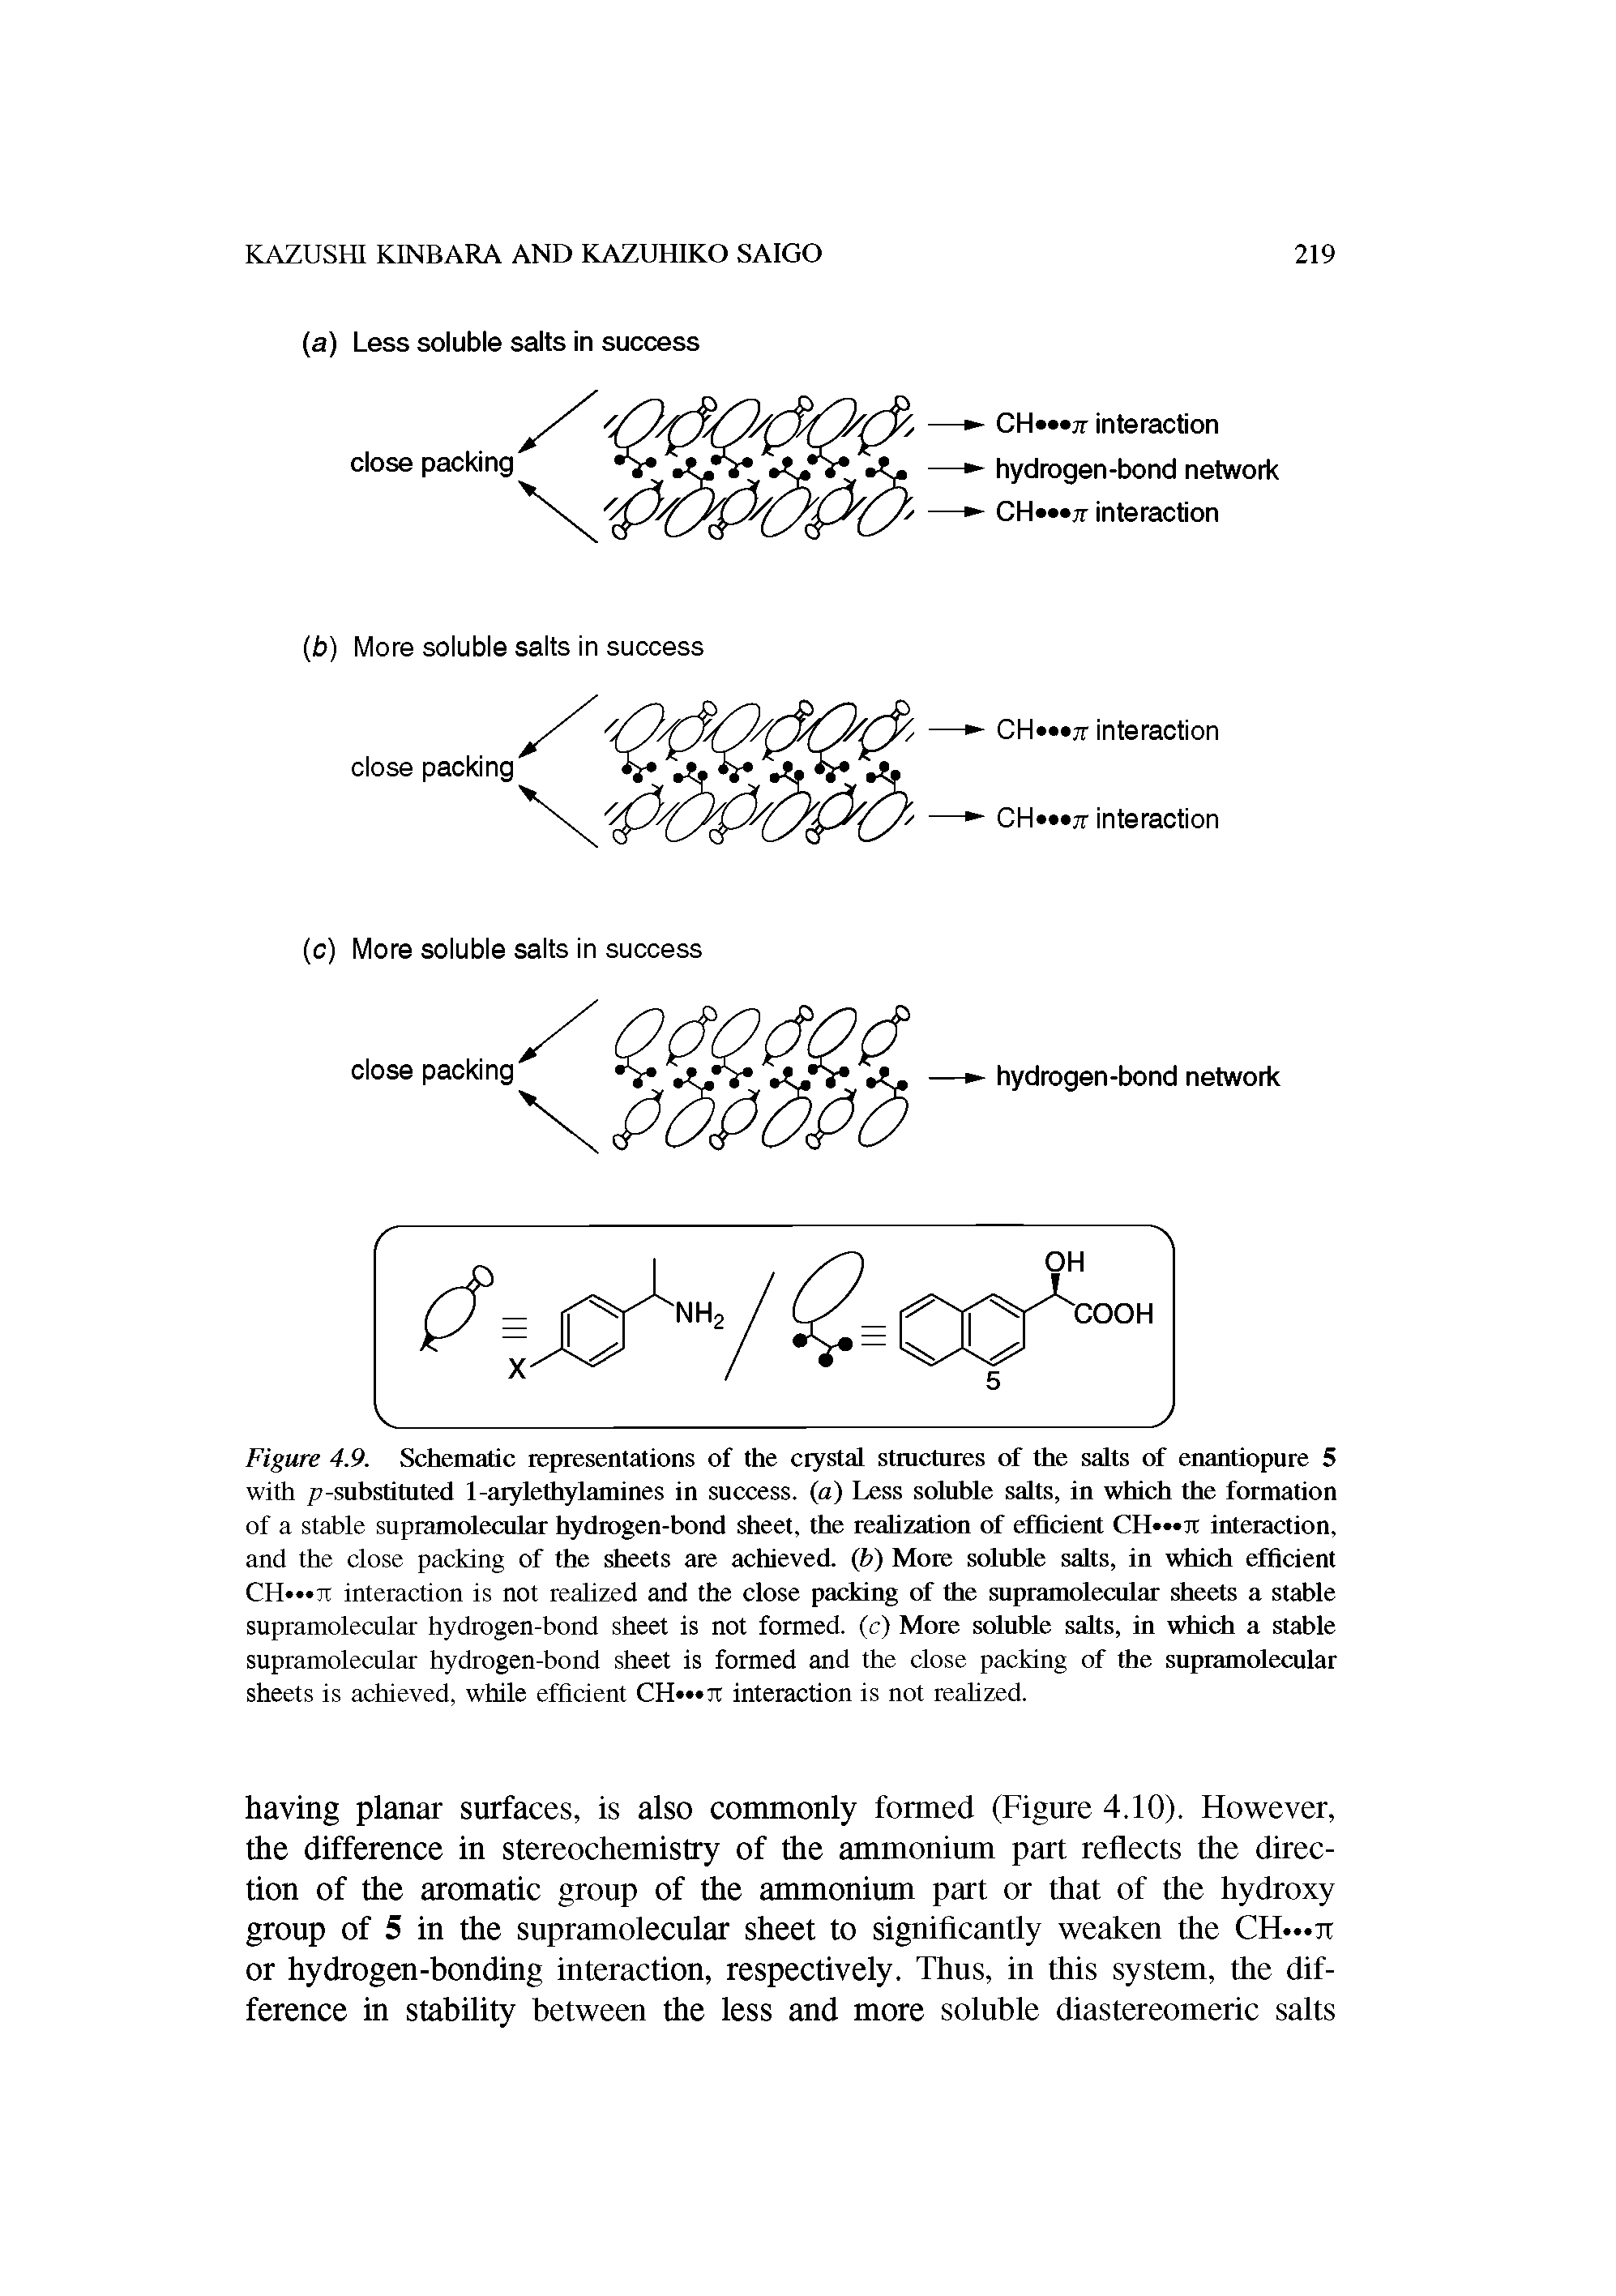 Figure 4.9. Schematic representations of the crystal structures of the salts of enantiopure 5 with / -substiluted 1-arylethylamines in success, (a) Less soluble salts, in which the formation of a stable supramolecular hydrogen-bond sheet, the realization of efficient CII—ti interaction, and the close packing of the sheets are achieved, (b) More soluble salts, in which efficient CH n interaction is not realized and the close packing of the supramolecular sheets a stable supramolecular hydrogen-bond sheet is not formed, (c) More soluble salts, in which a stable supramolecular hydrogen-bond sheet is formed and the close packing of the supramolecular sheets is achieved, while efficient interaction is not realized.